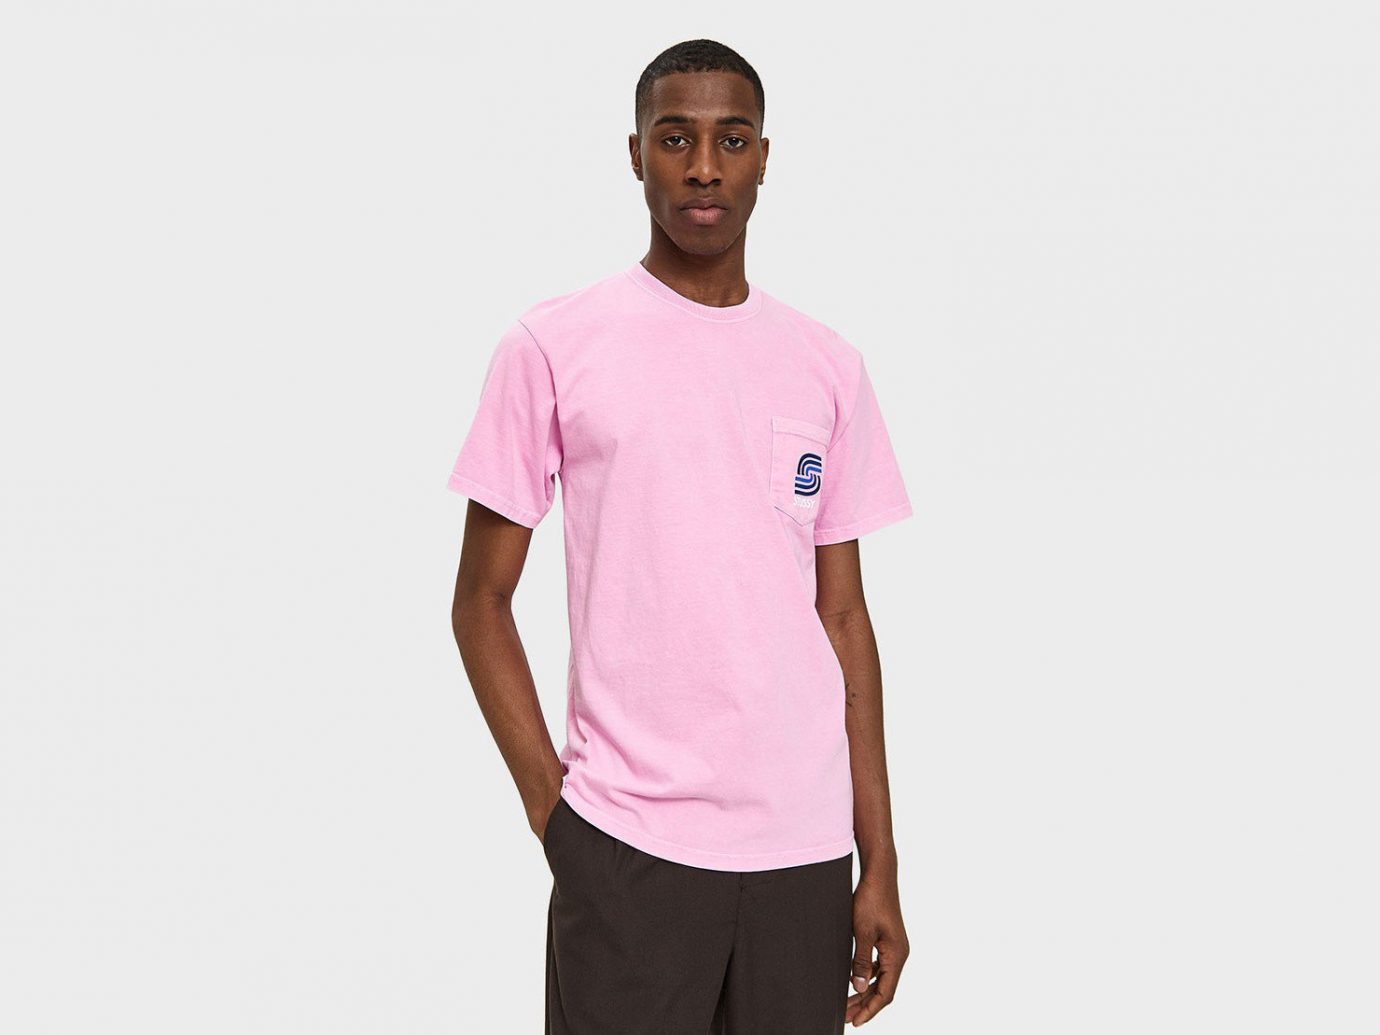 Spring Travel Style + Design Summer Travel Travel Shop t shirt clothing pink white sleeve standing person shoulder magenta neck joint arm sportswear pocket product posing